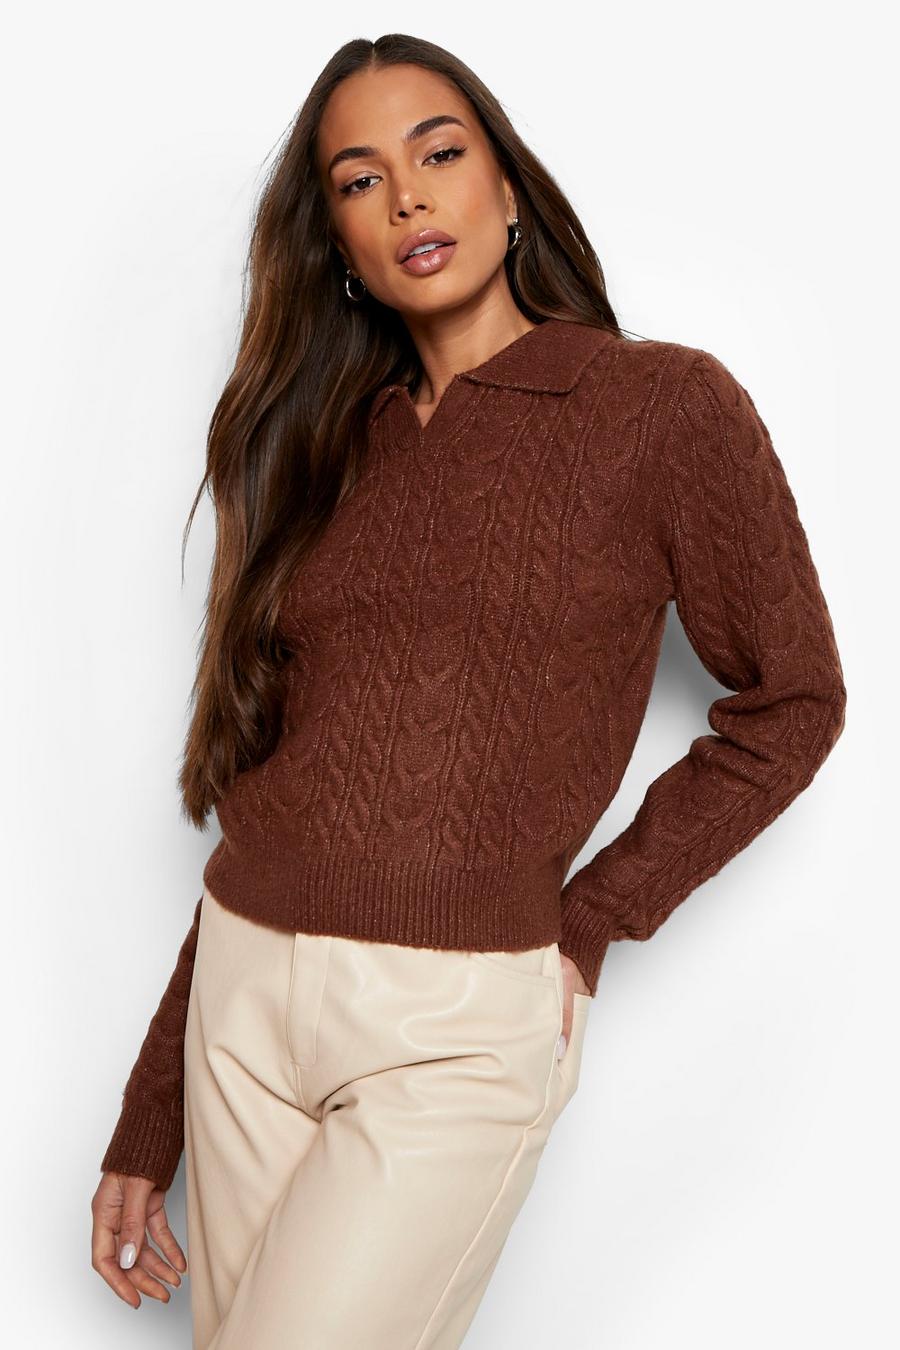 Pull en maille torsadée avec col style polo, Chocolate brown